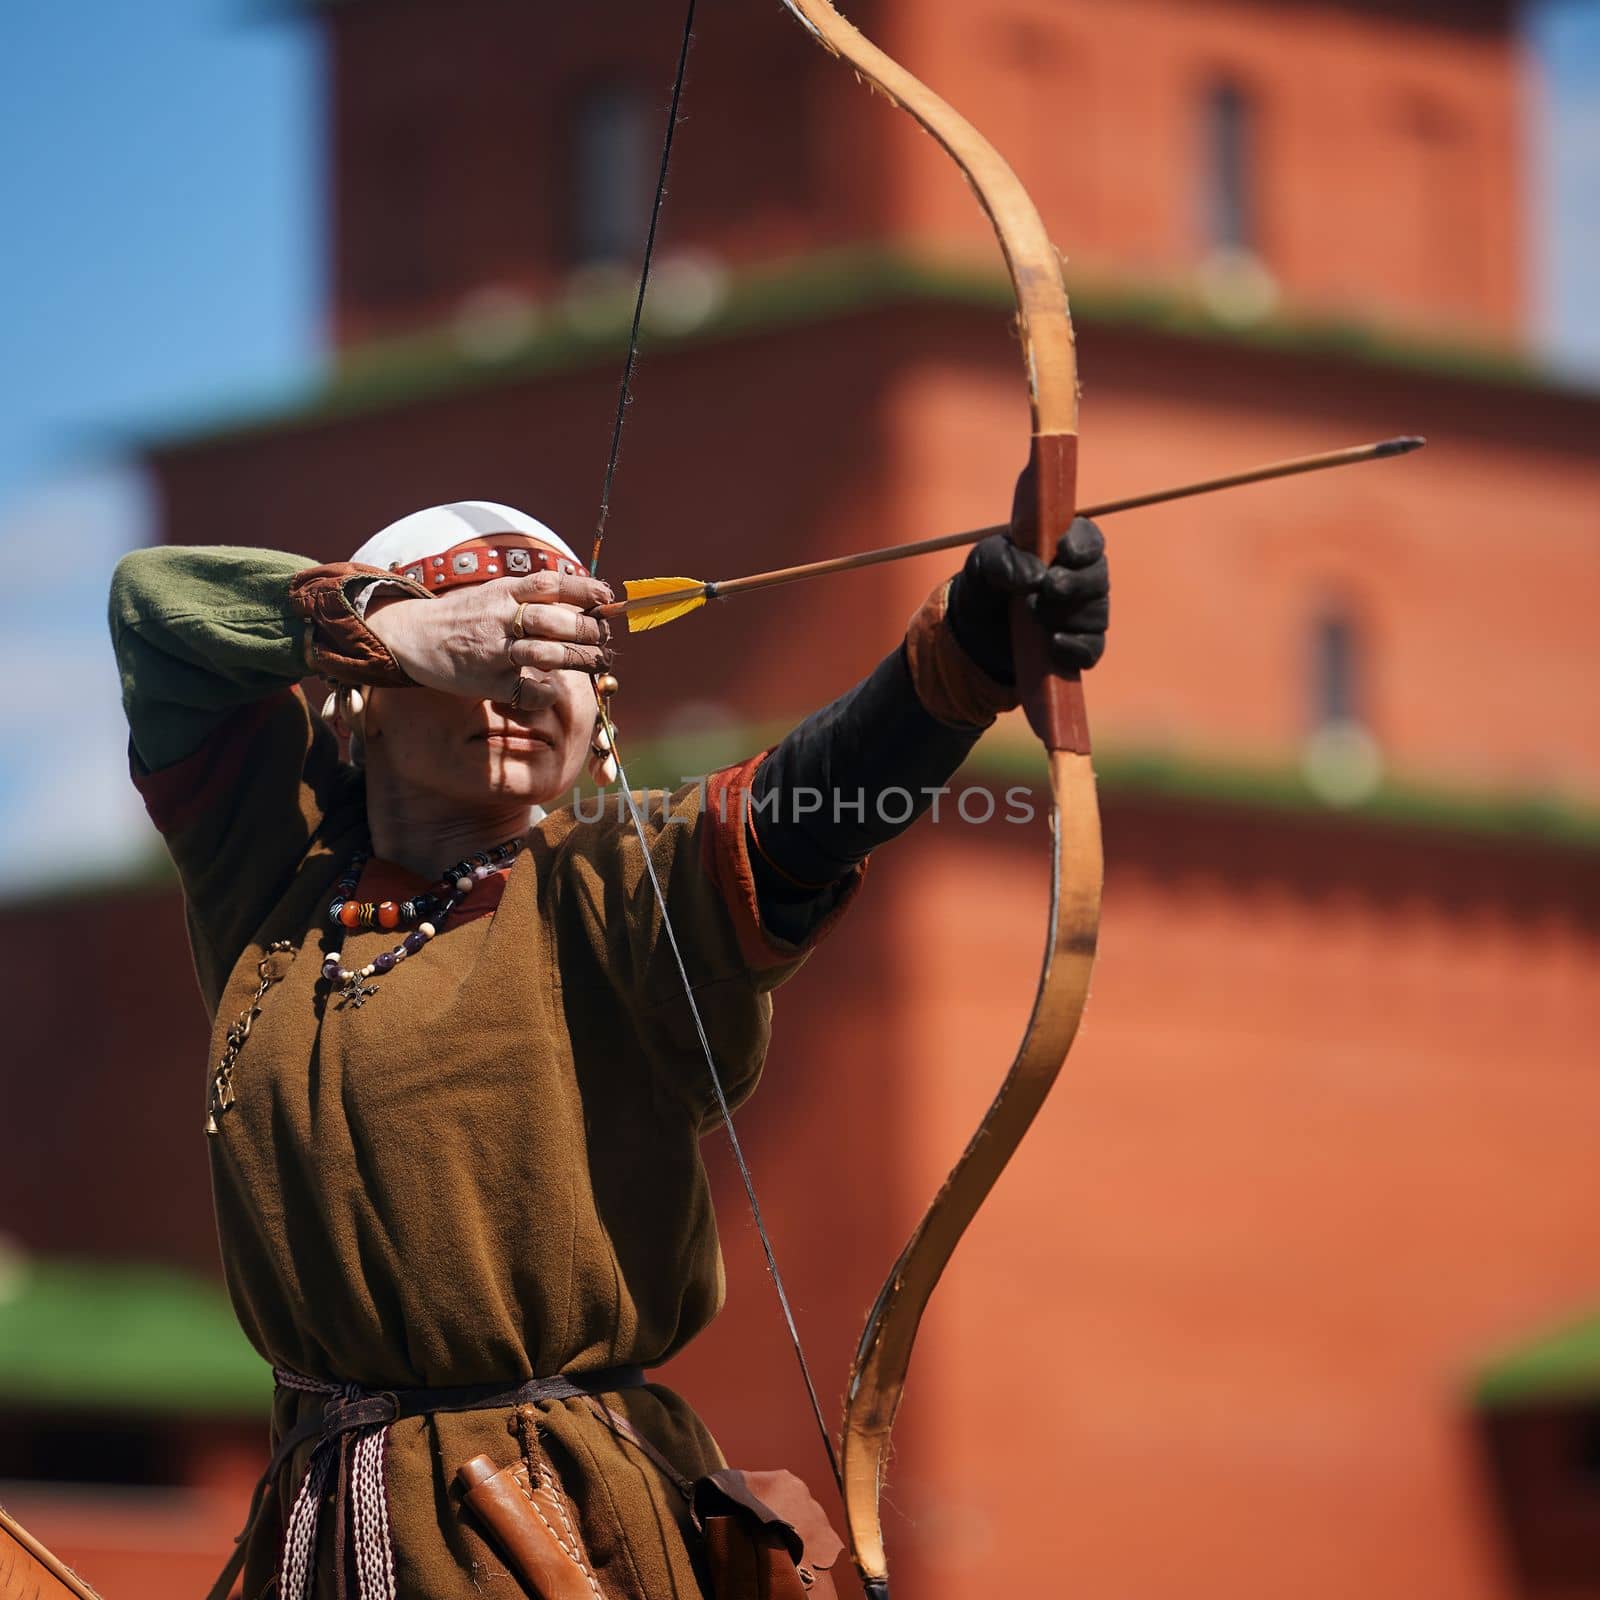 Medieval archery tournament. A woman shoots an arrow in the medieval castle yard. Woman in medieval dress with a wooden bow in her hands. historical reconstruction. 14.05,2022. Yoshkar-Ola, Russia by EvgeniyQW